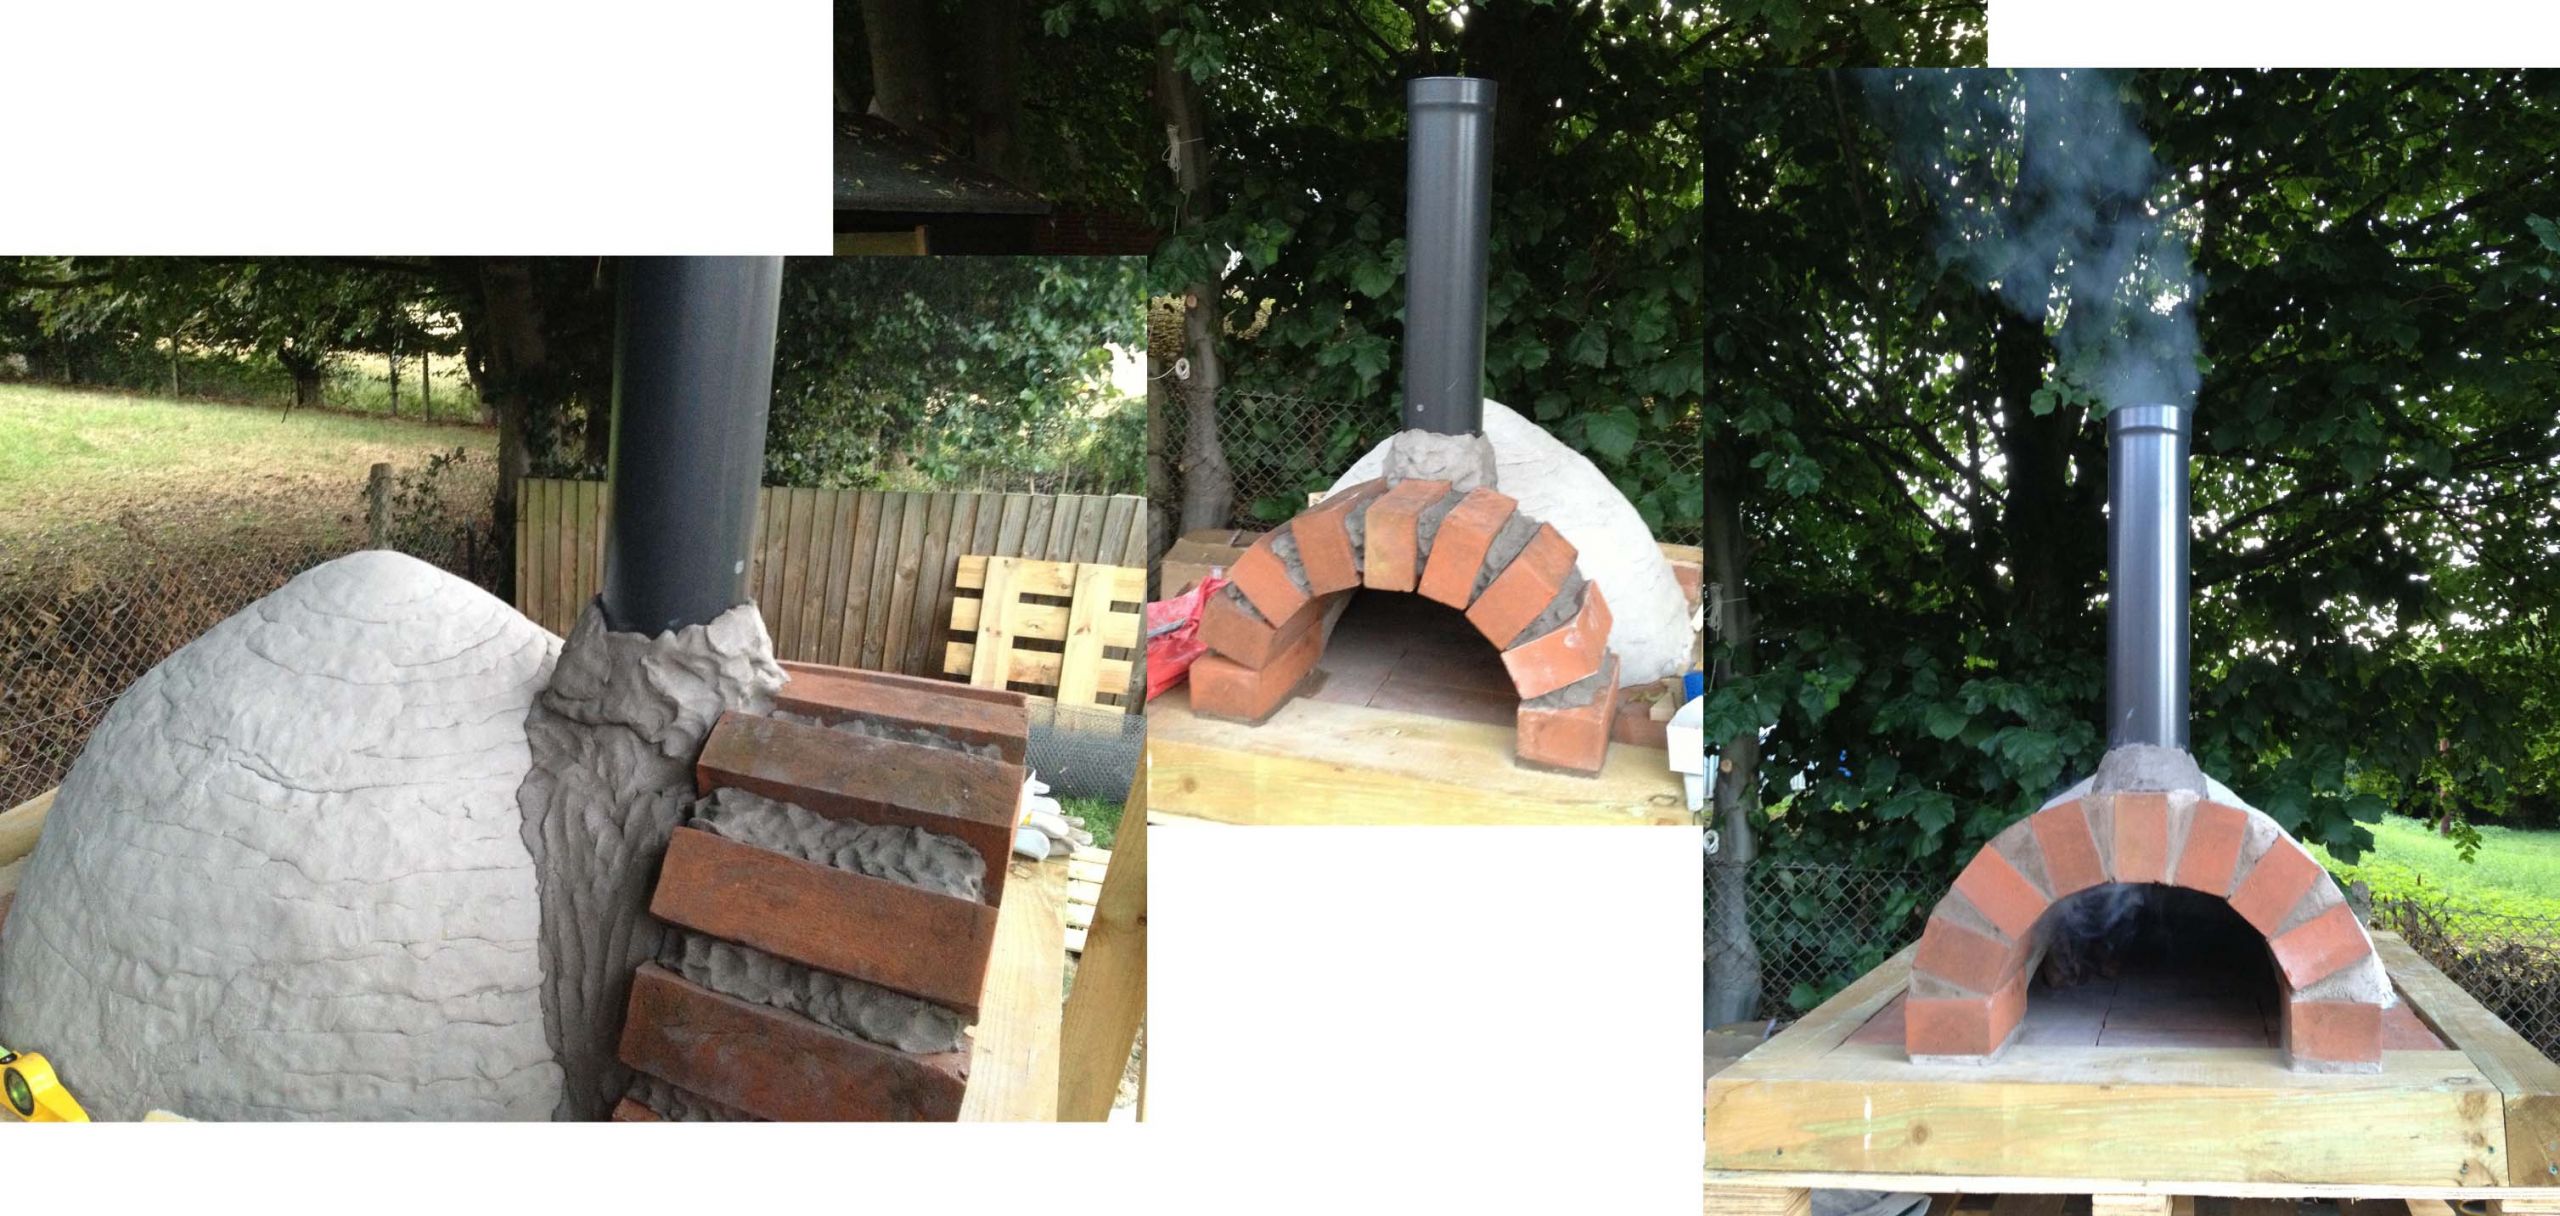 DIY Woodfire Pizza Oven
 The Homemade Pallet Based Wood Fired Pizza Oven